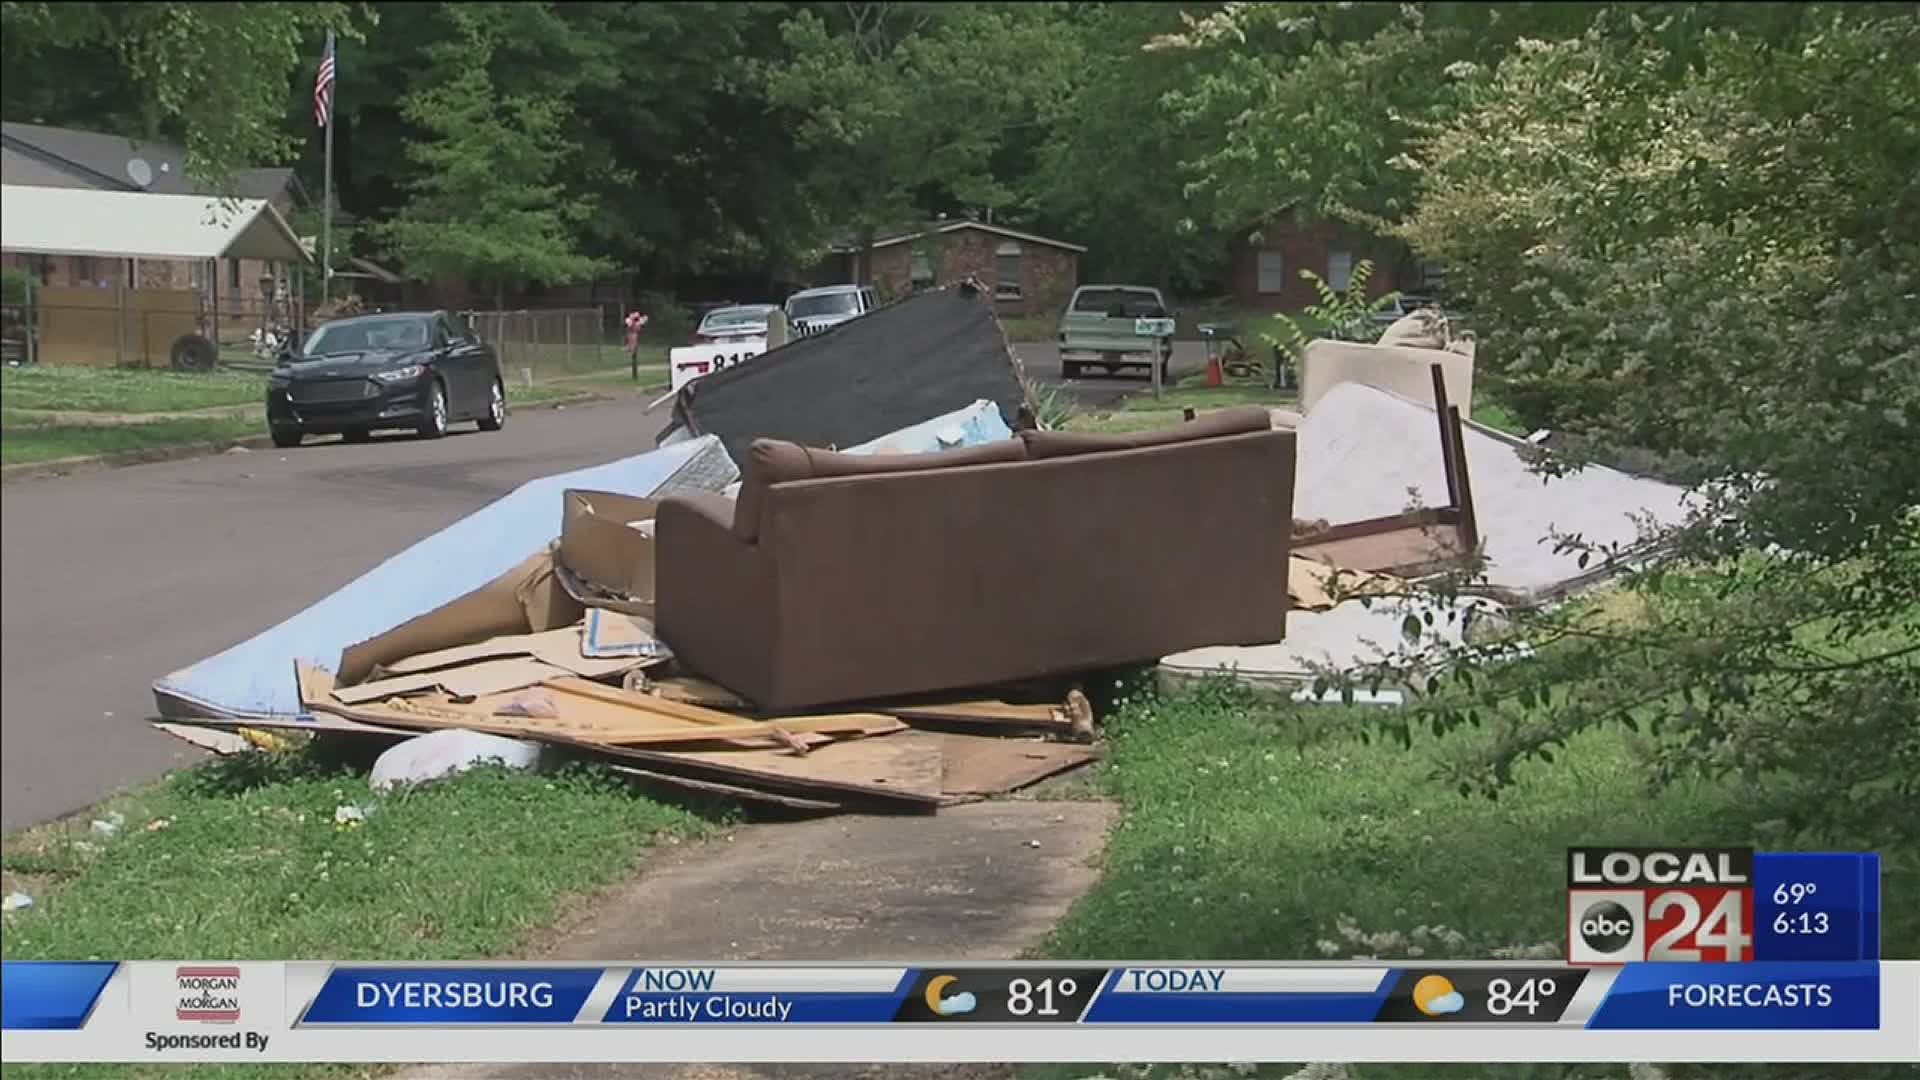 The hope is that it will help curb illegal dumping in the area.